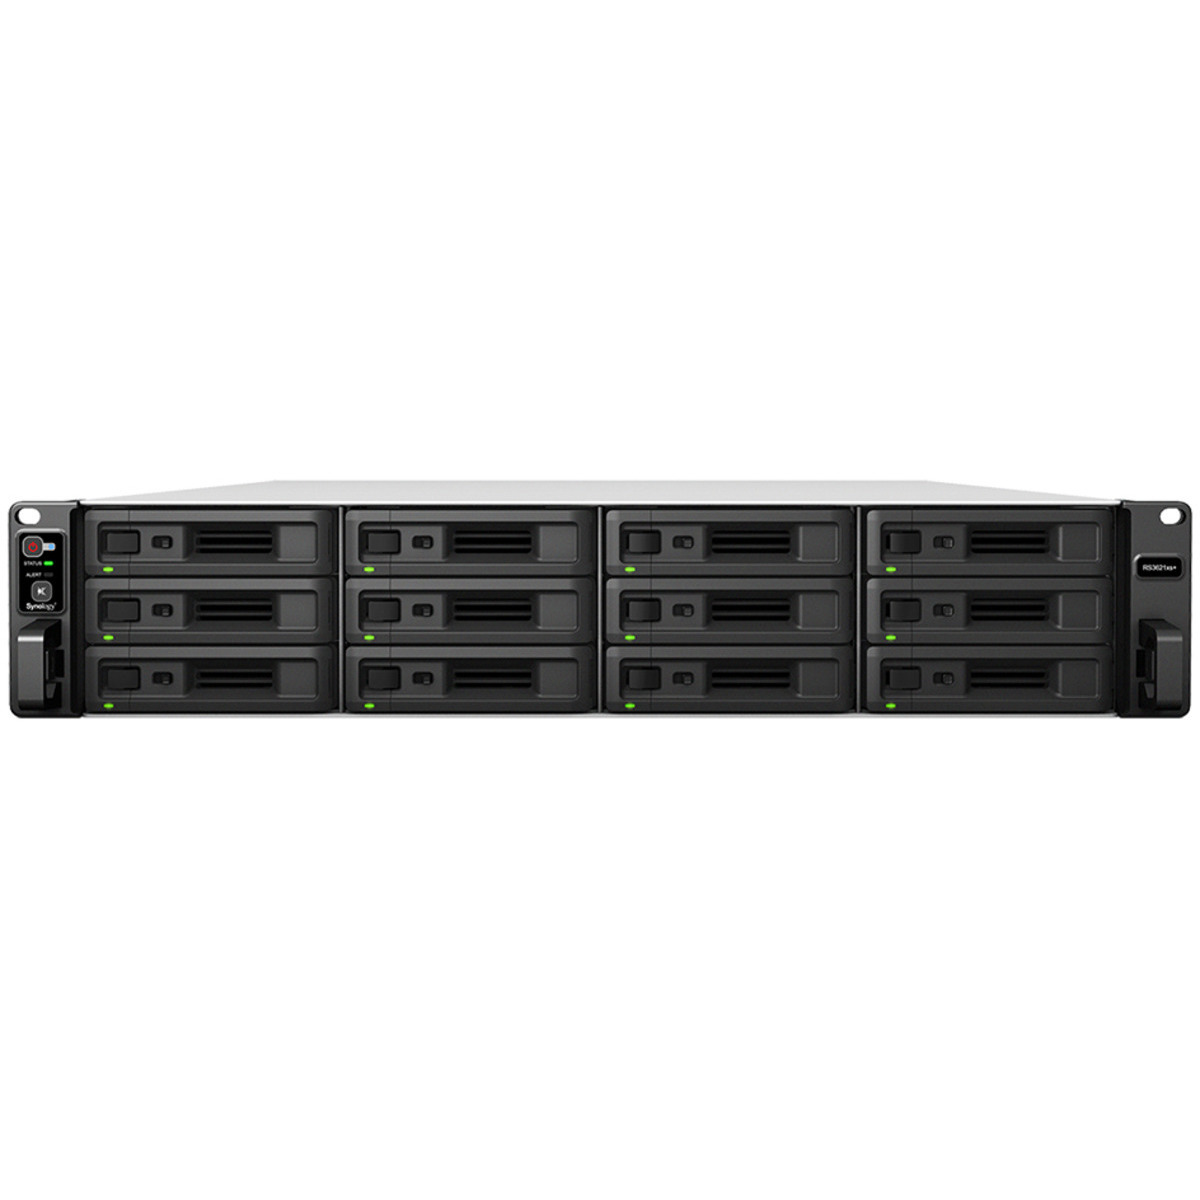 Synology RackStation RS3621xs+ 112tb 12-Bay RackMount Large Business / Enterprise NAS - Network Attached Storage Device 7x16tb Seagate IronWolf ST16000VN001 3.5 7200rpm SATA 6Gb/s HDD NAS Class Drives Installed - Burn-In Tested RackStation RS3621xs+